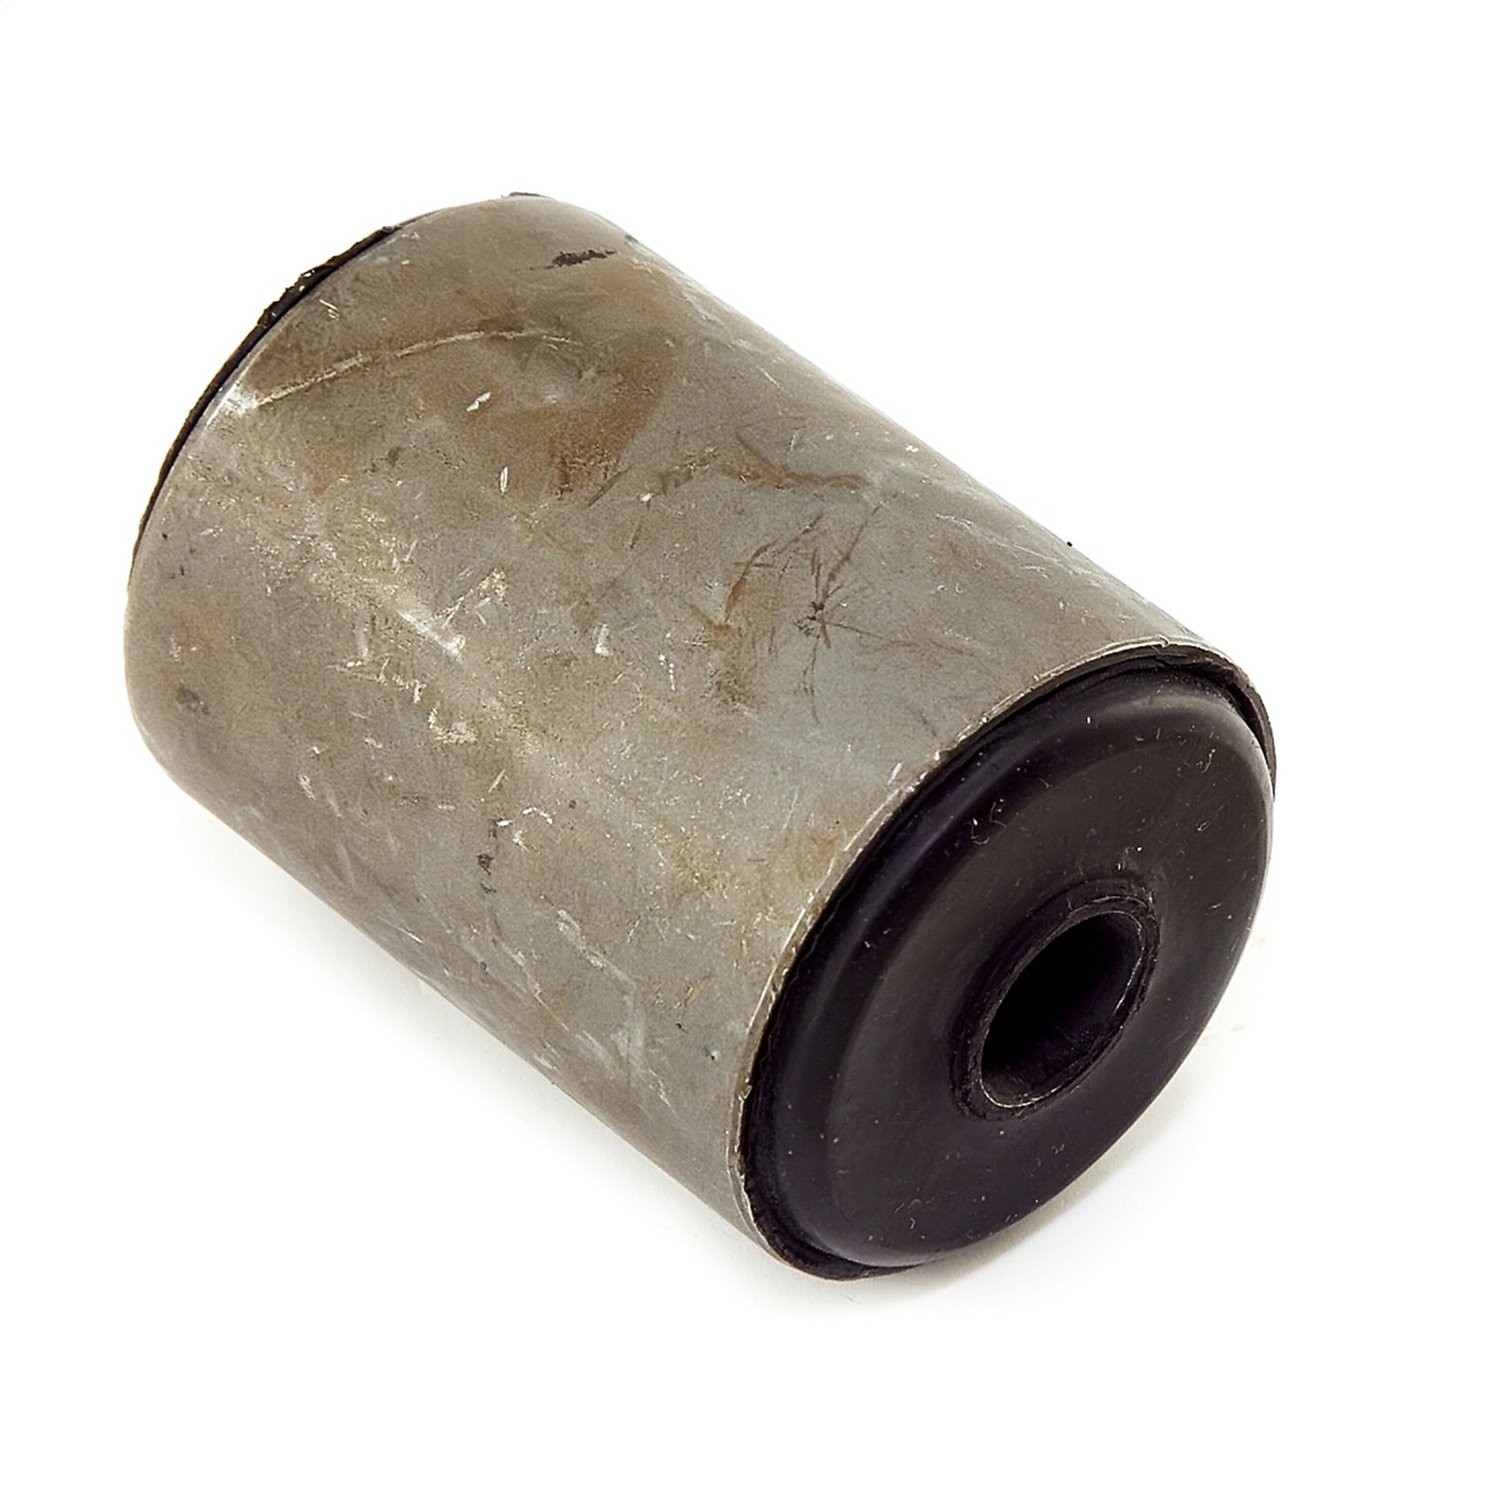 Replacement front leaf spring bushing from Omix-ADA, Fits